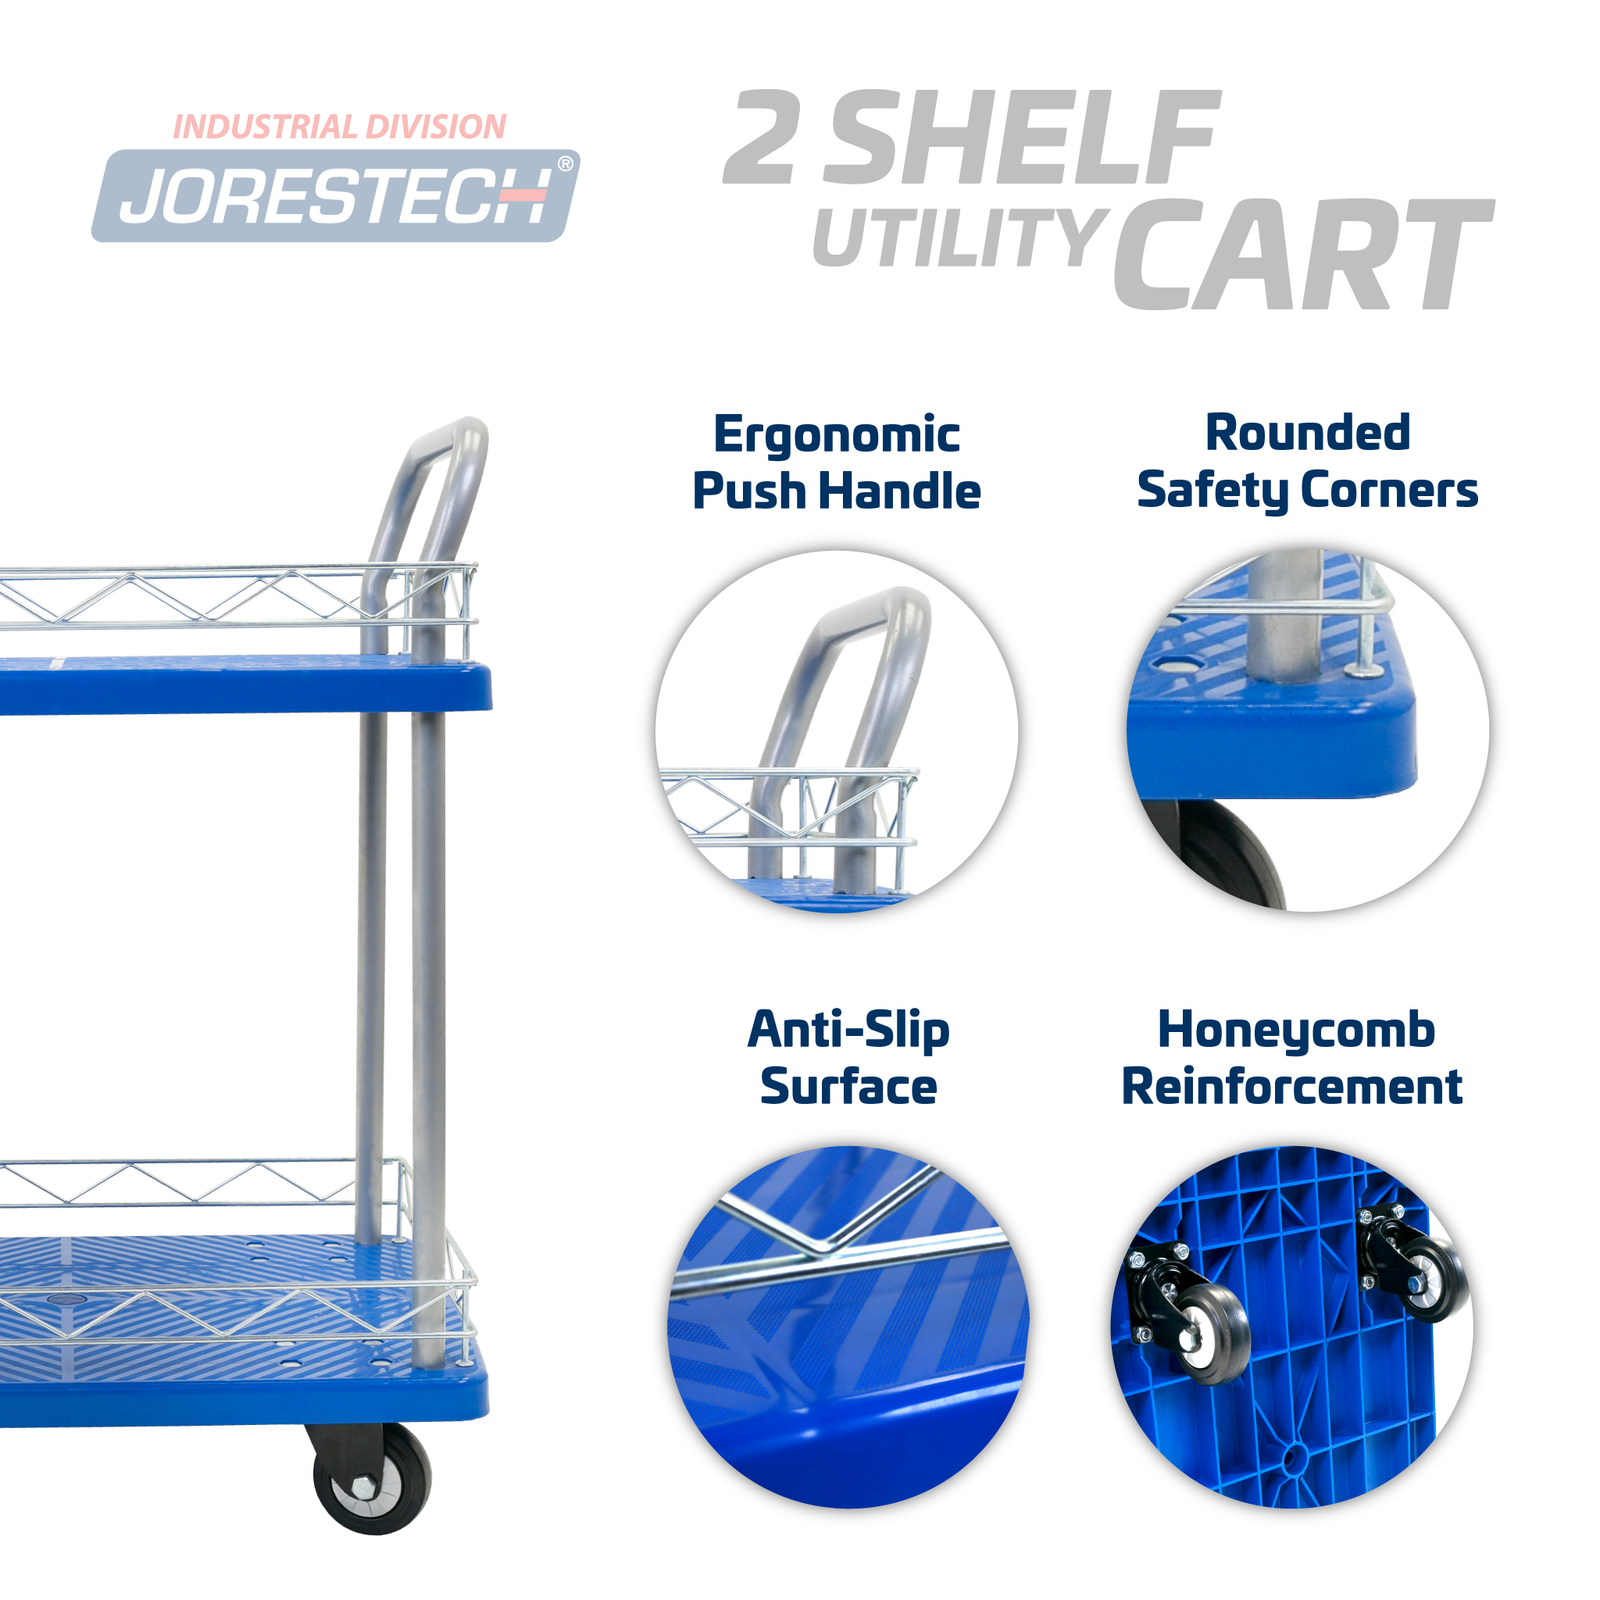 The Jorestech 2 shelf utility push cart and main features include: ergonomic push handle, rounded safety corners, anti-slip surface, honeycomb reinforcement